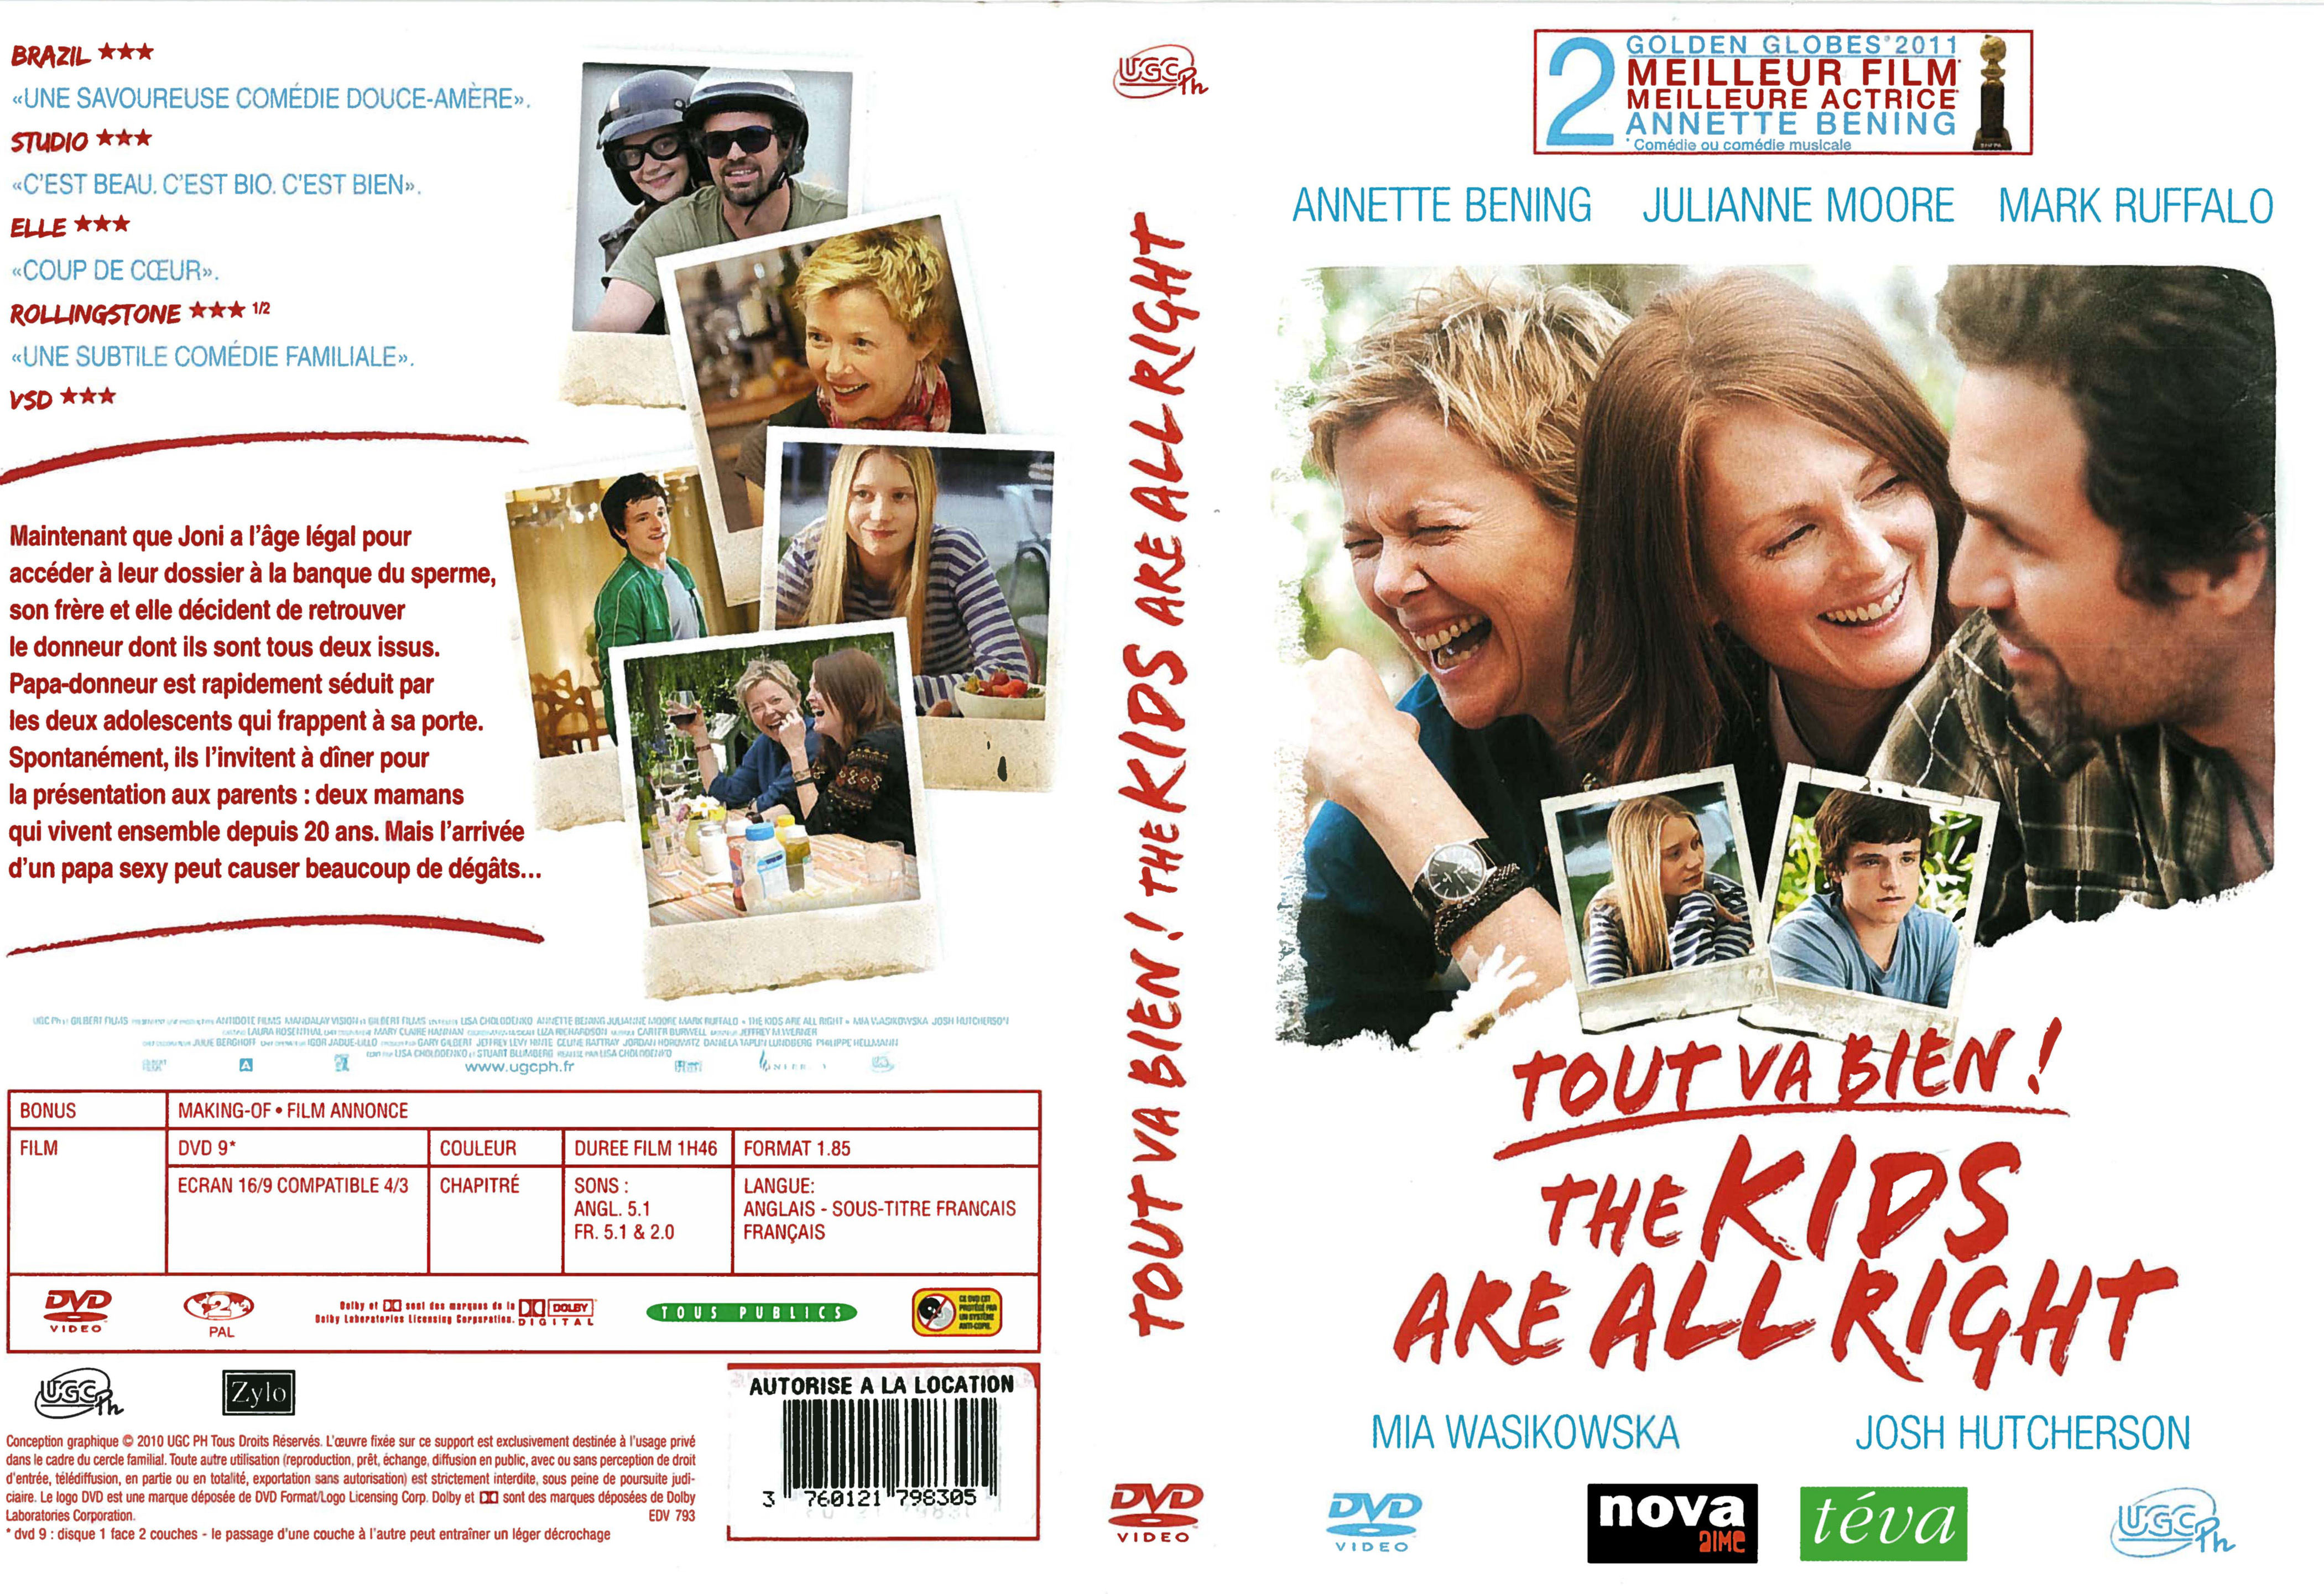 Jaquette DVD Tout va bien - The kids are all right